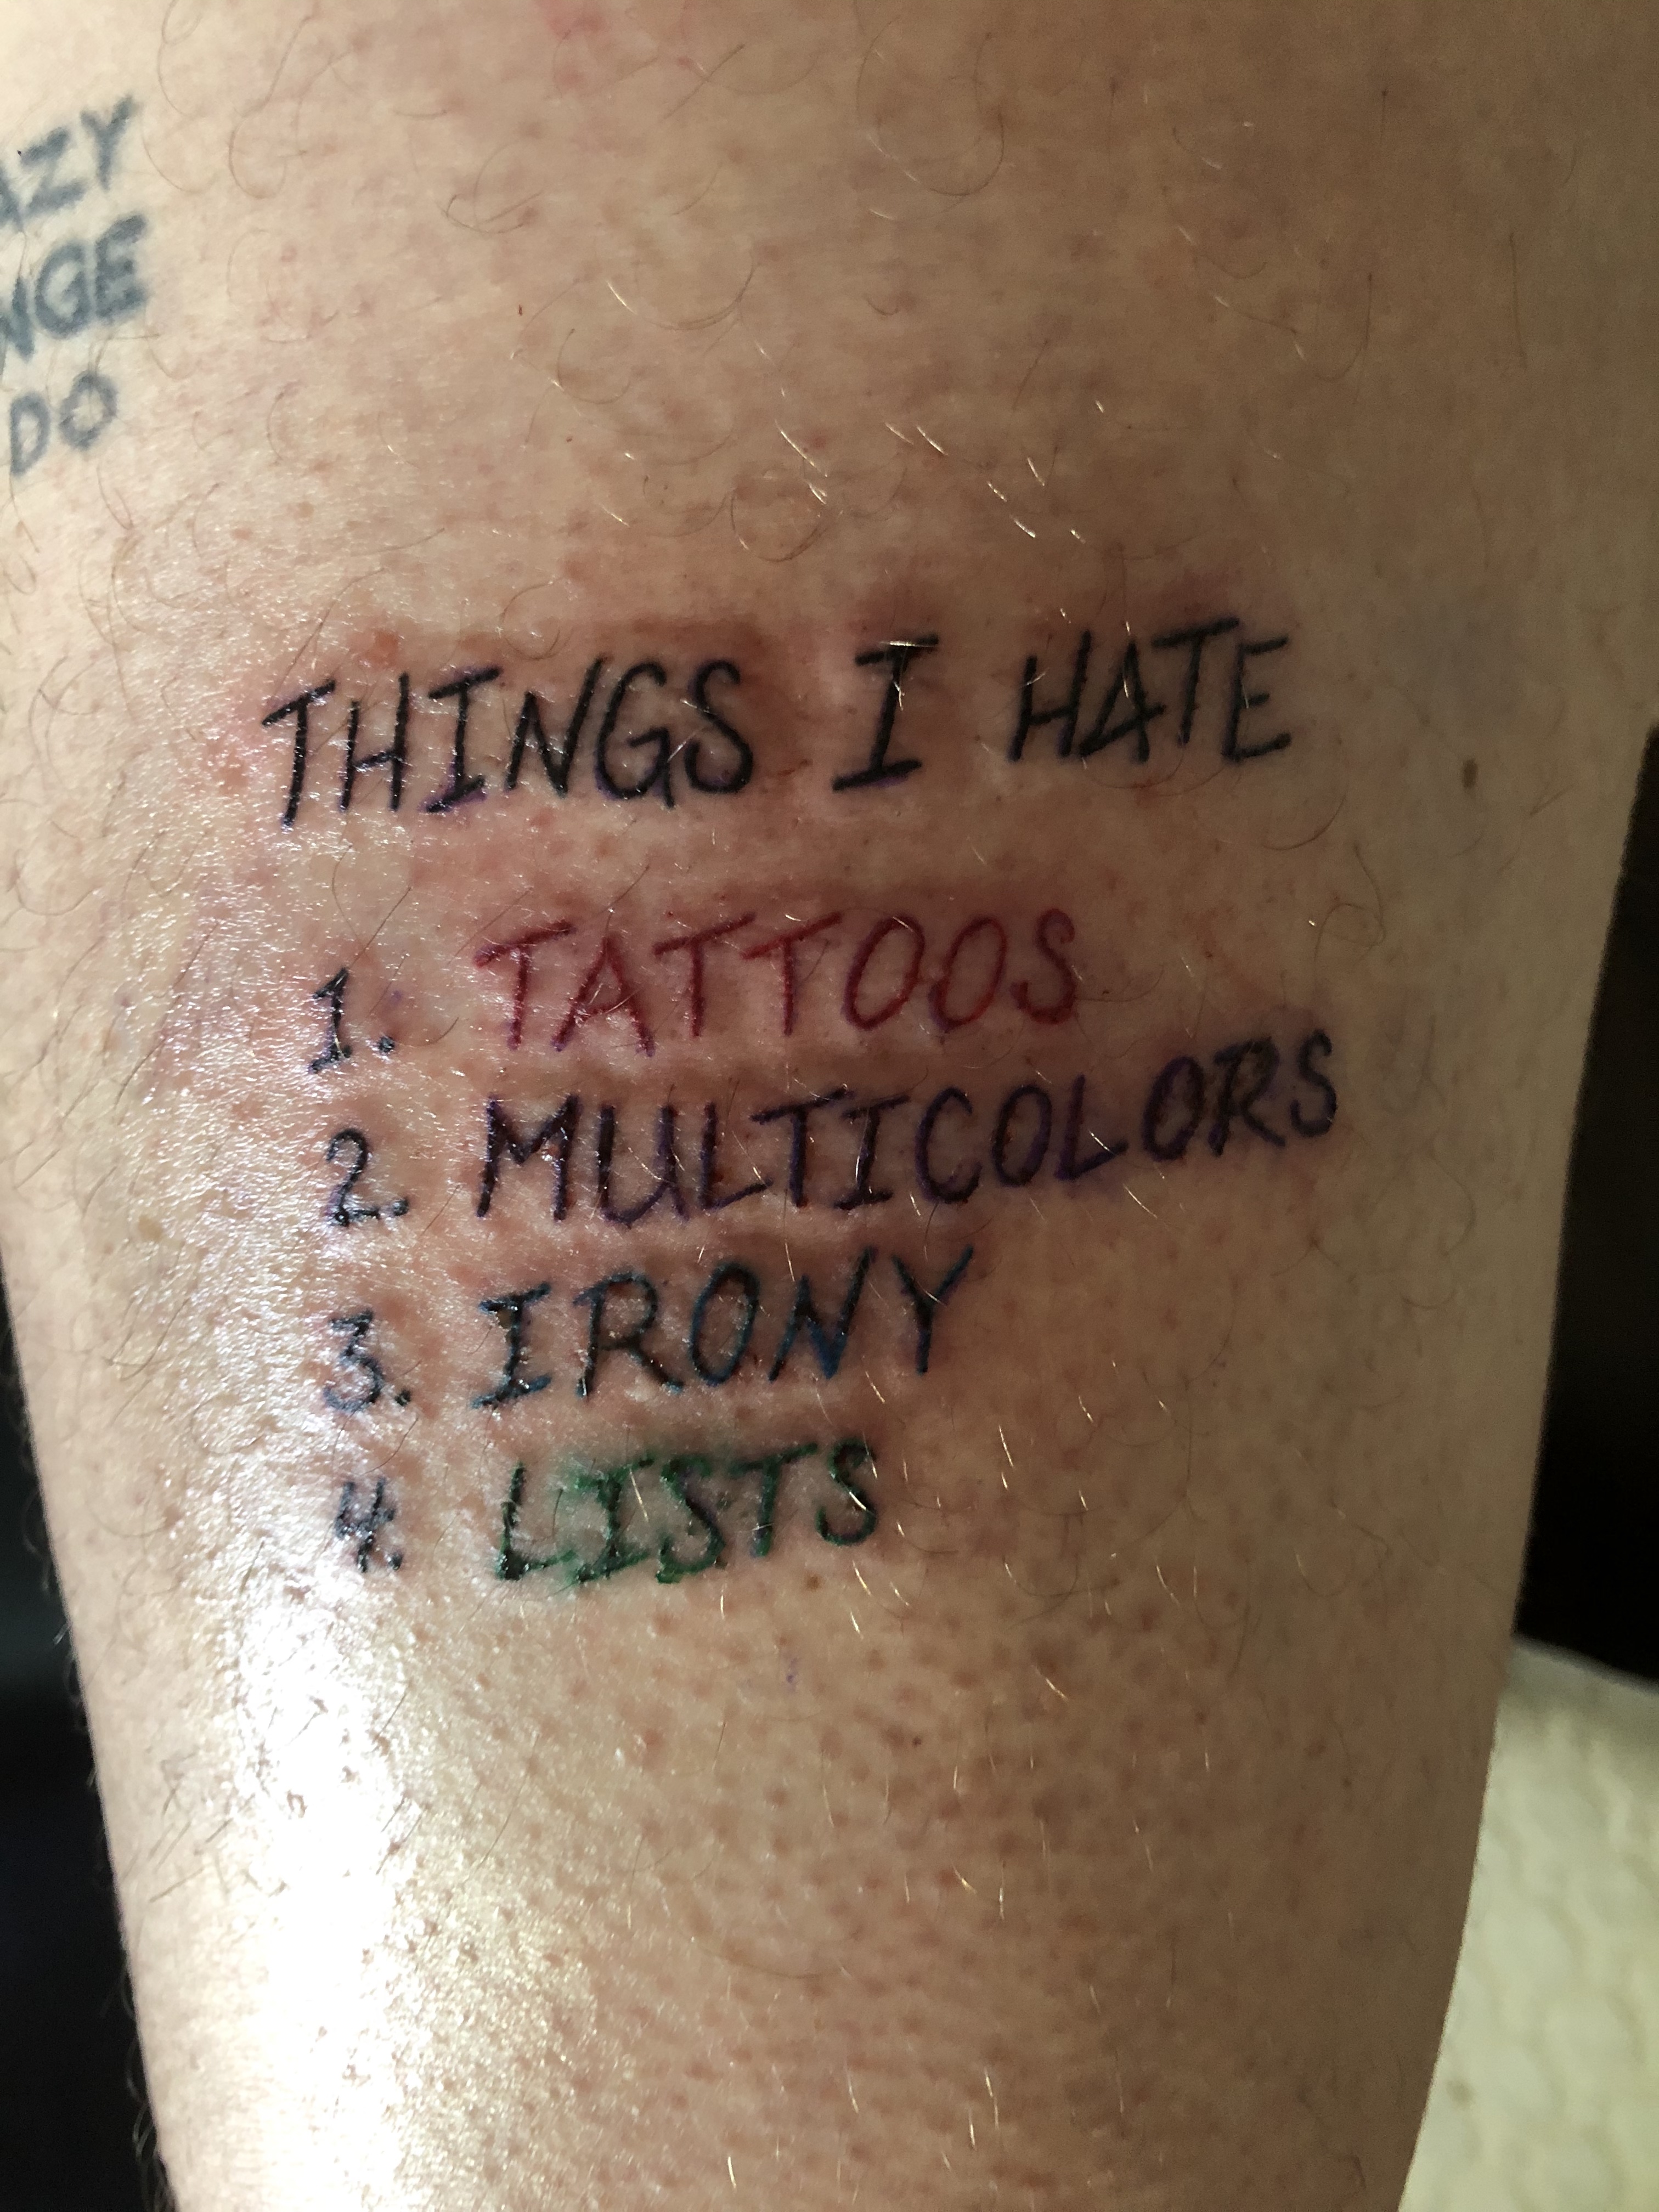 oh, the irony : r/shittytattoos